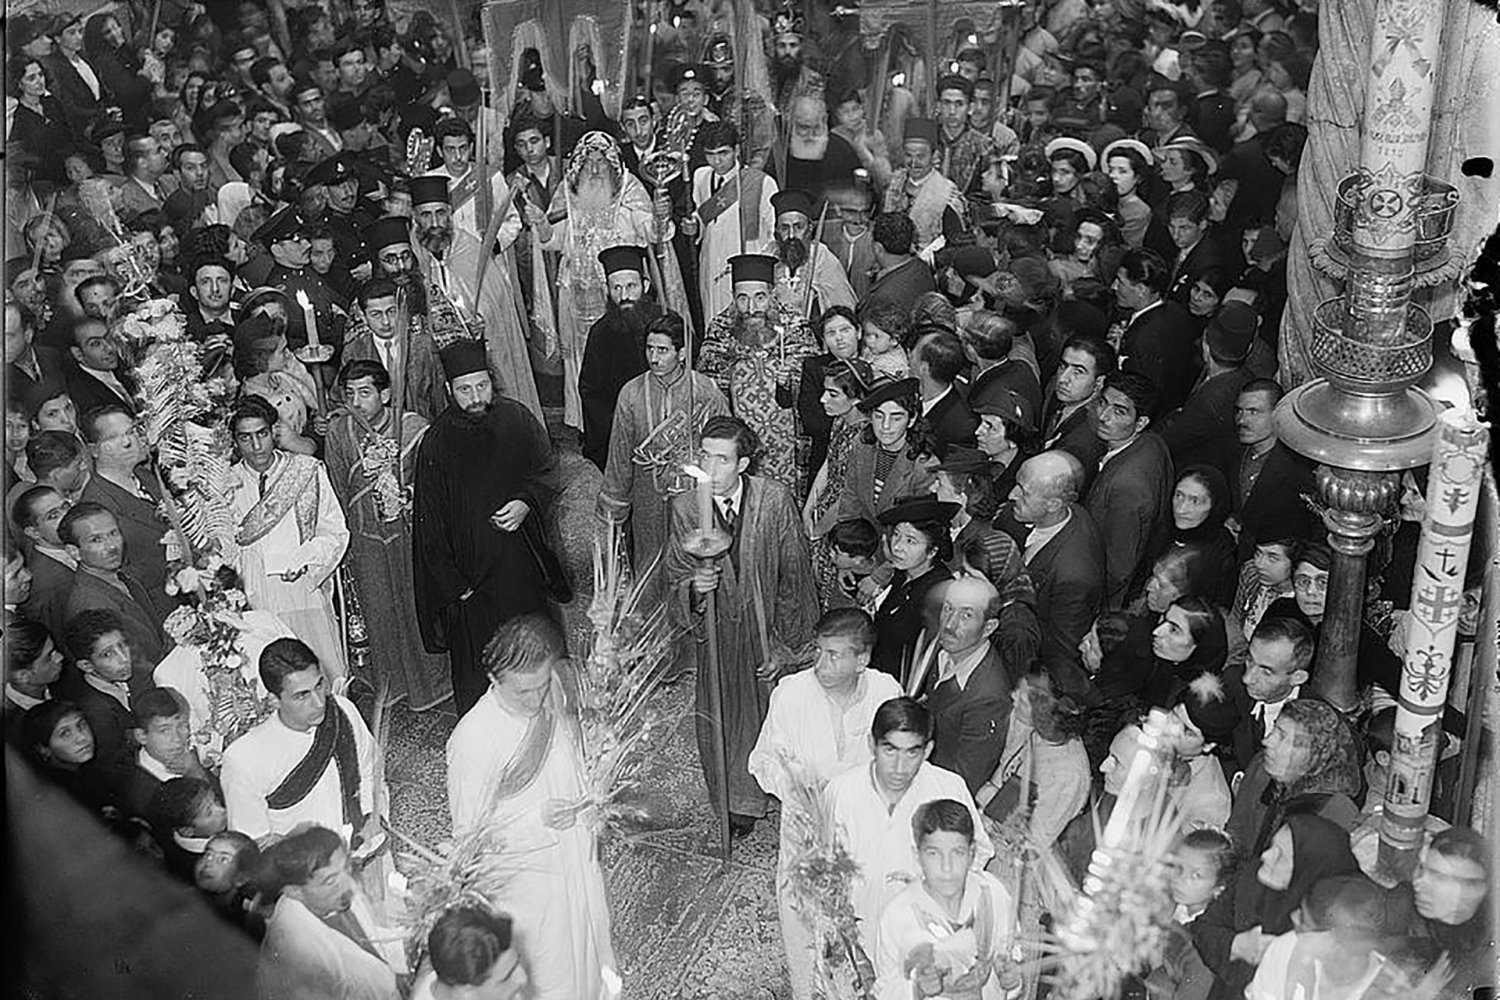 A Syrian Orthodox Palm Sunday procession in Jerusalem during Easter 1941